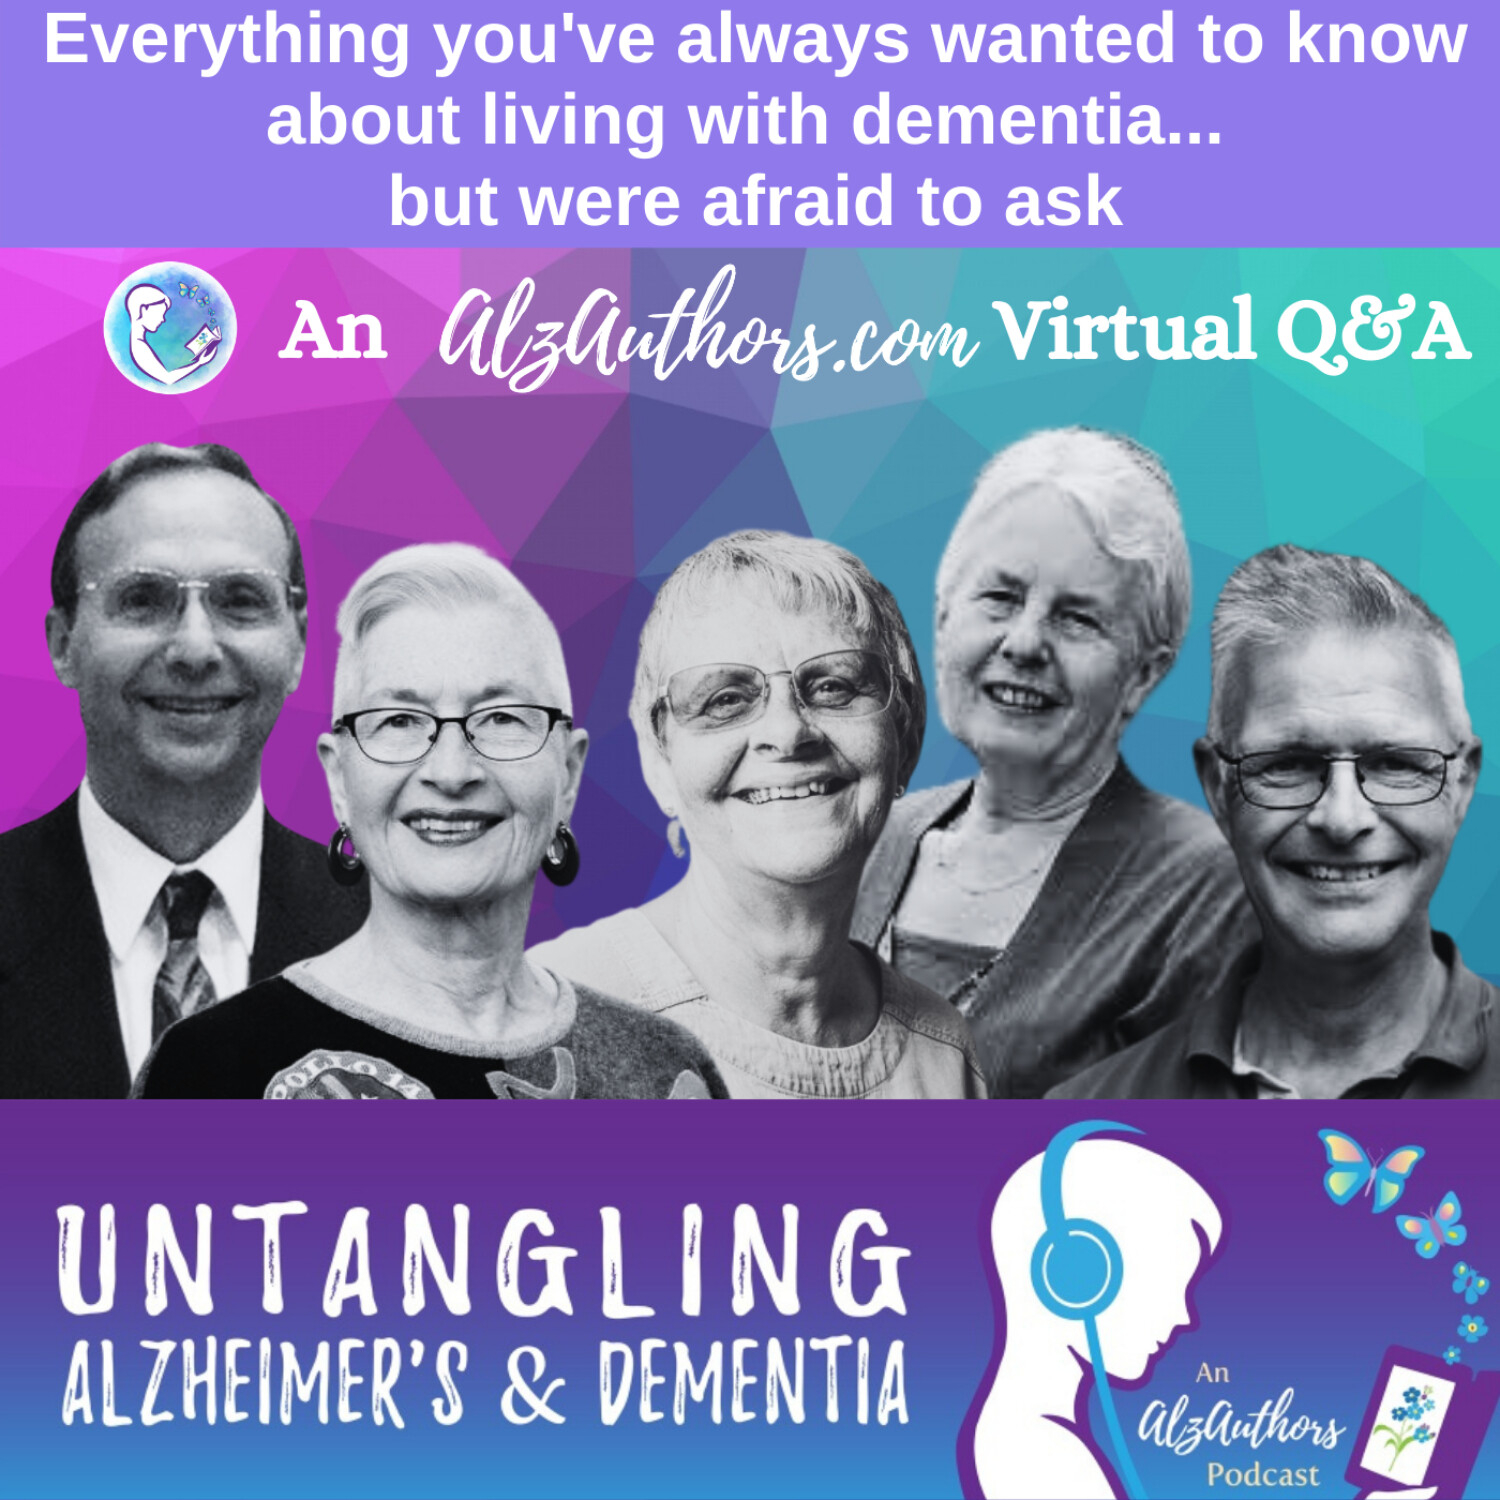 Everything You've Always Wanted to Know About Living With Dementia: A Virtual Q&A